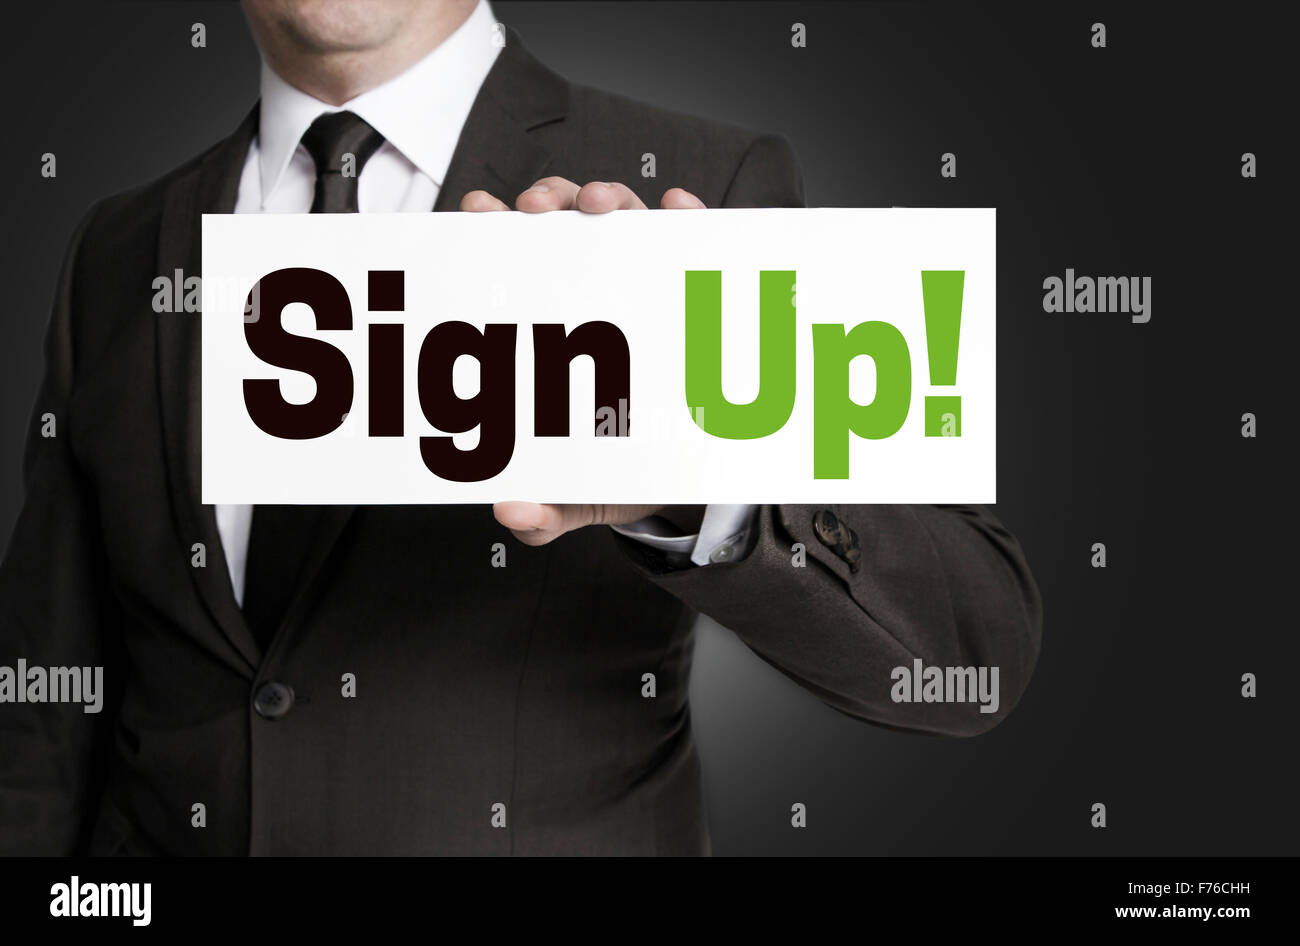 sign up plate held by businessman concept. Stock Photo